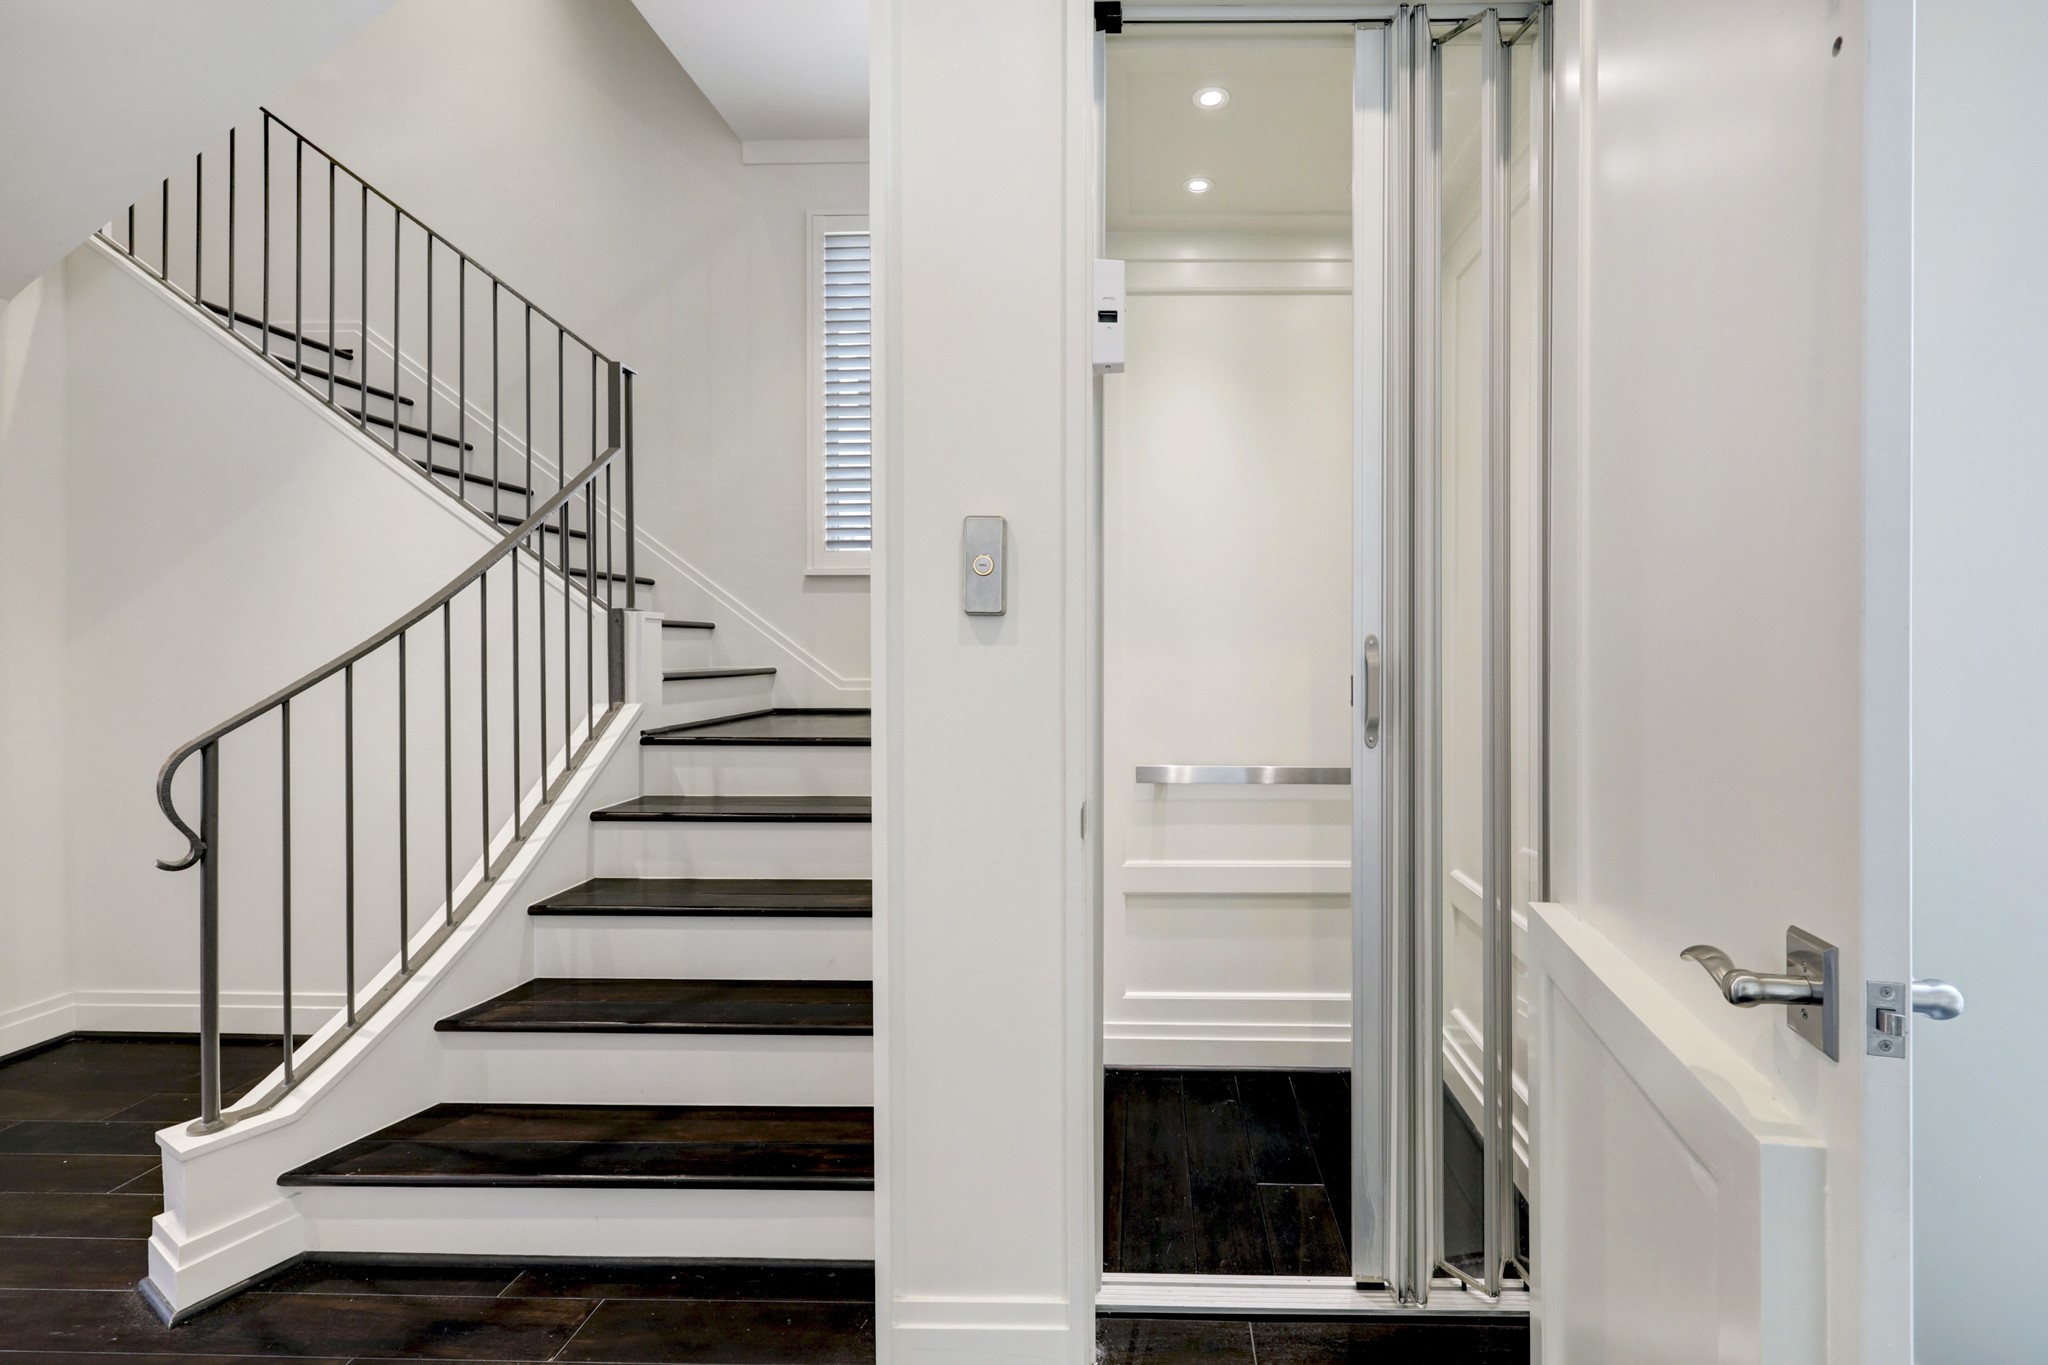 Elevator to all three levels and view of entry staircase.